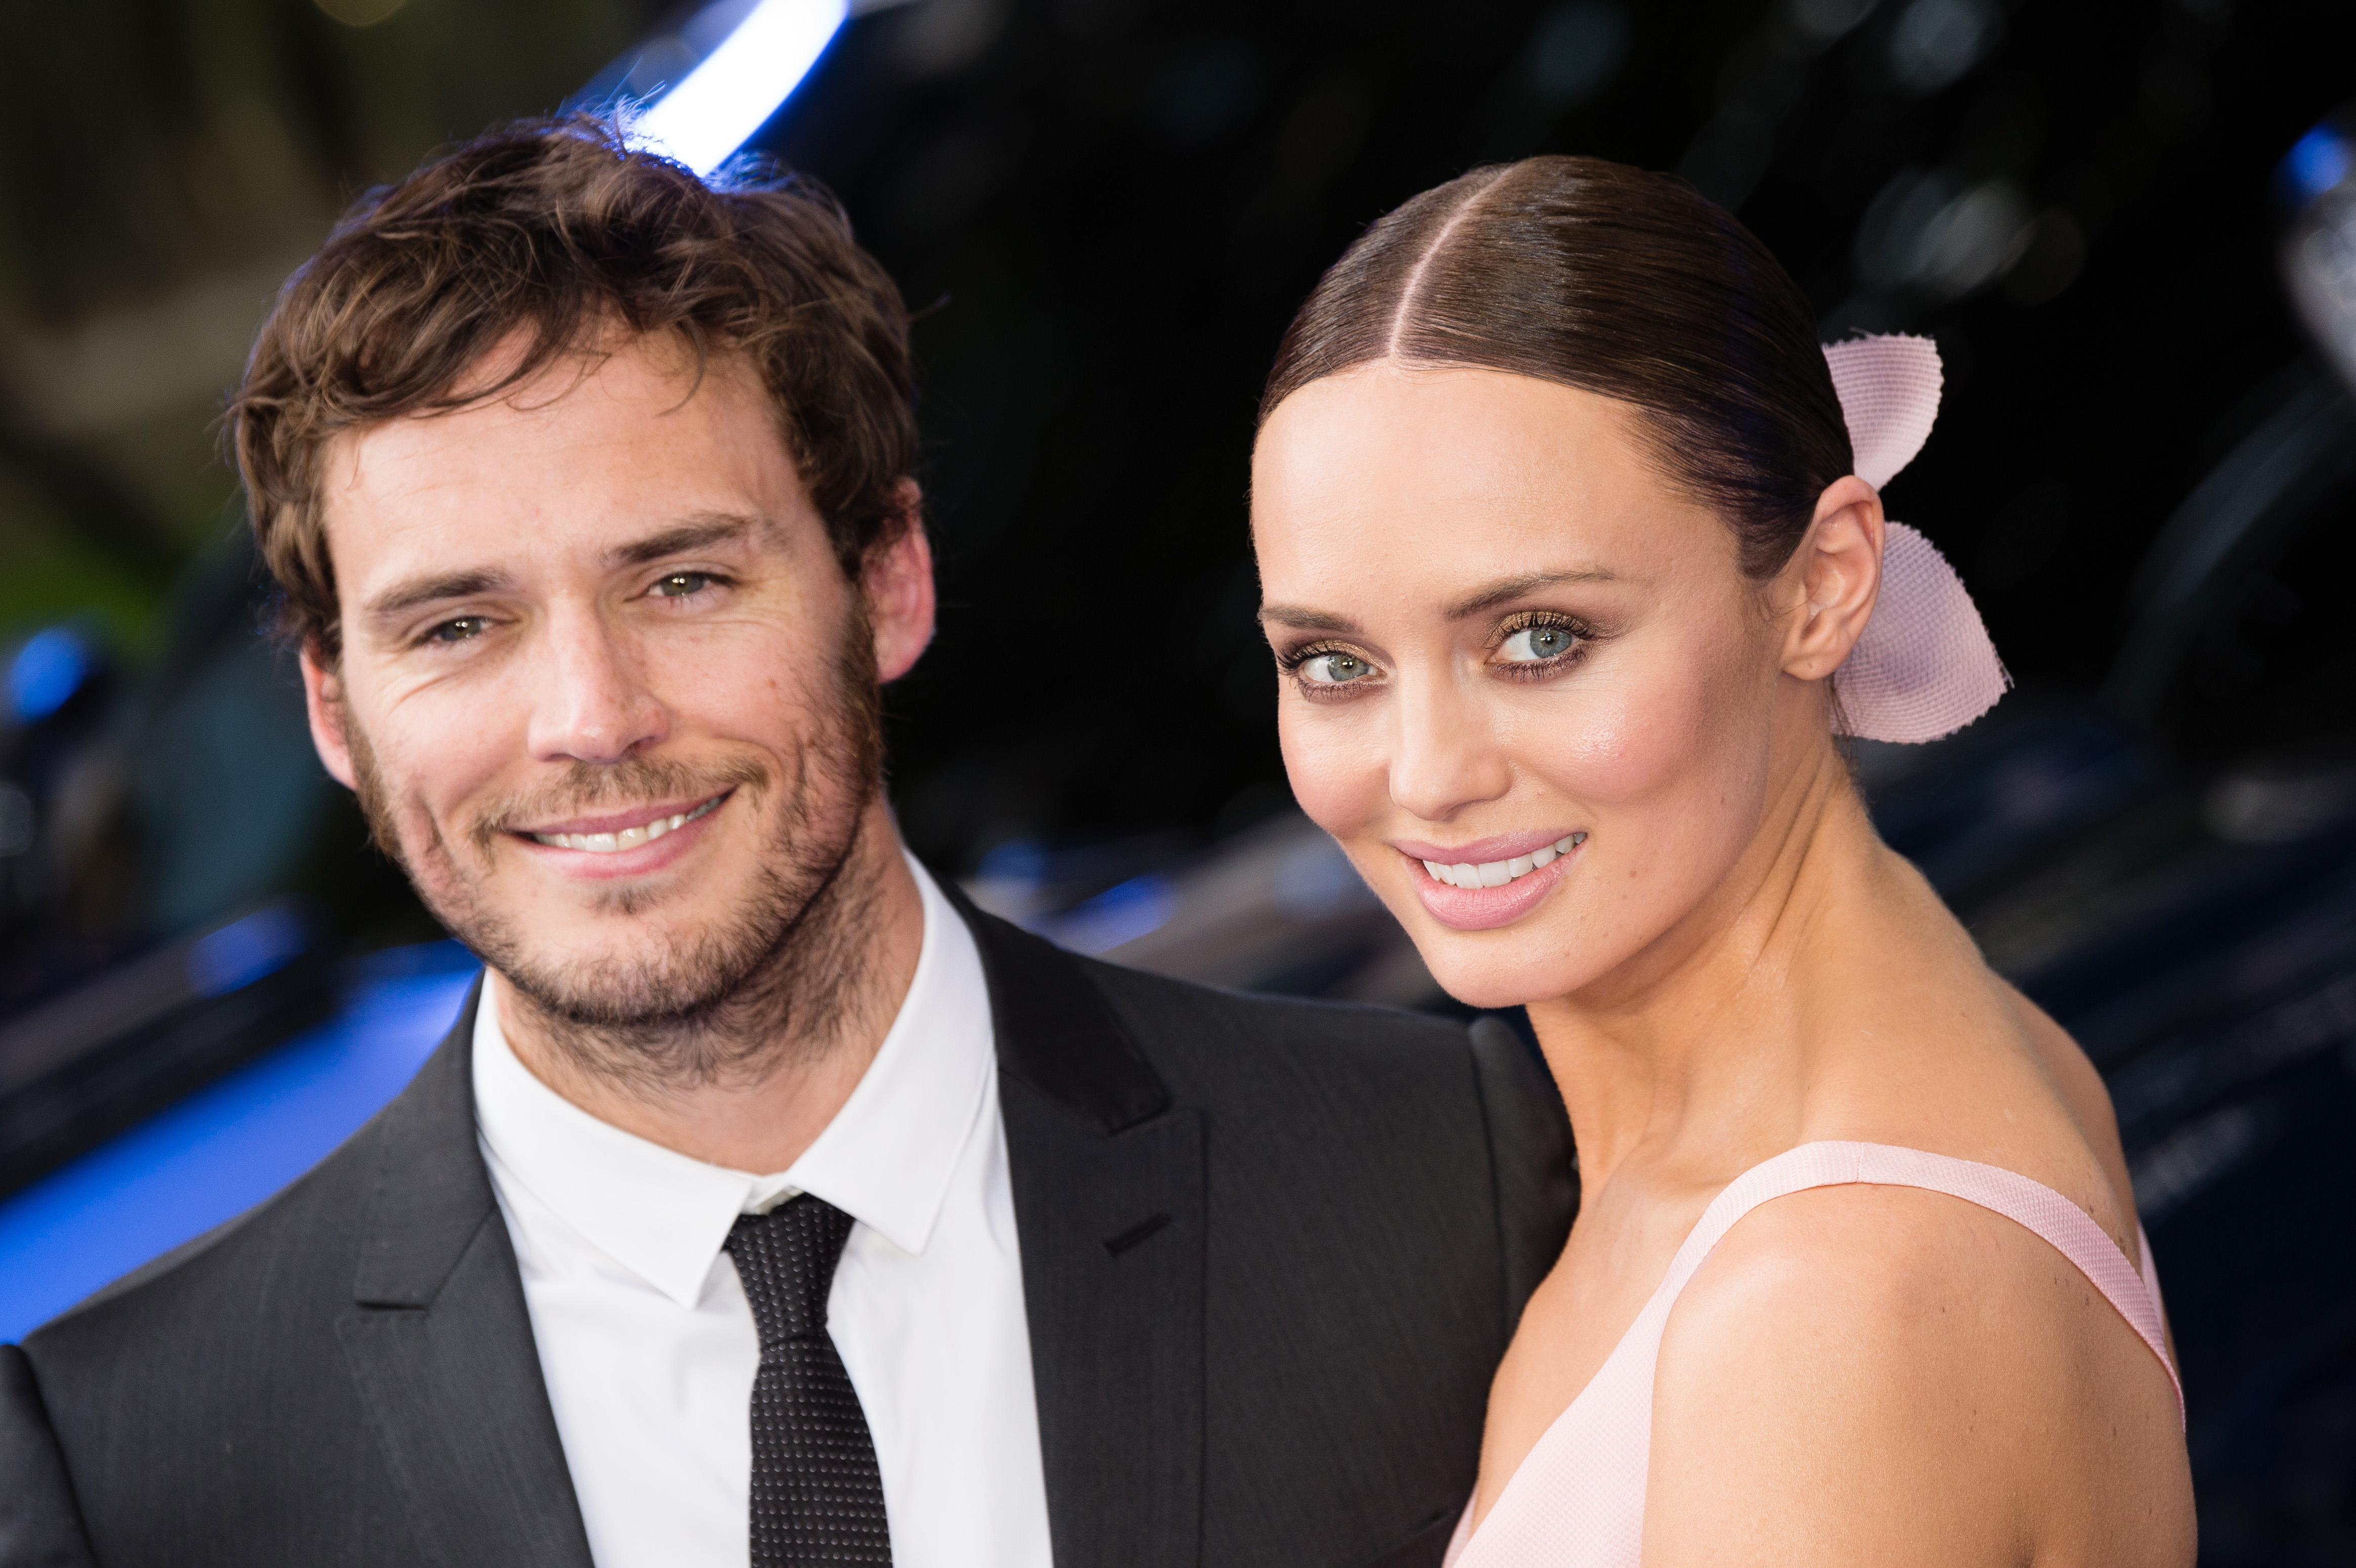 Sam Claflin and Laura Haddock at the world premiere of "Transformers: The Last Knight" in 2017, in London, England.